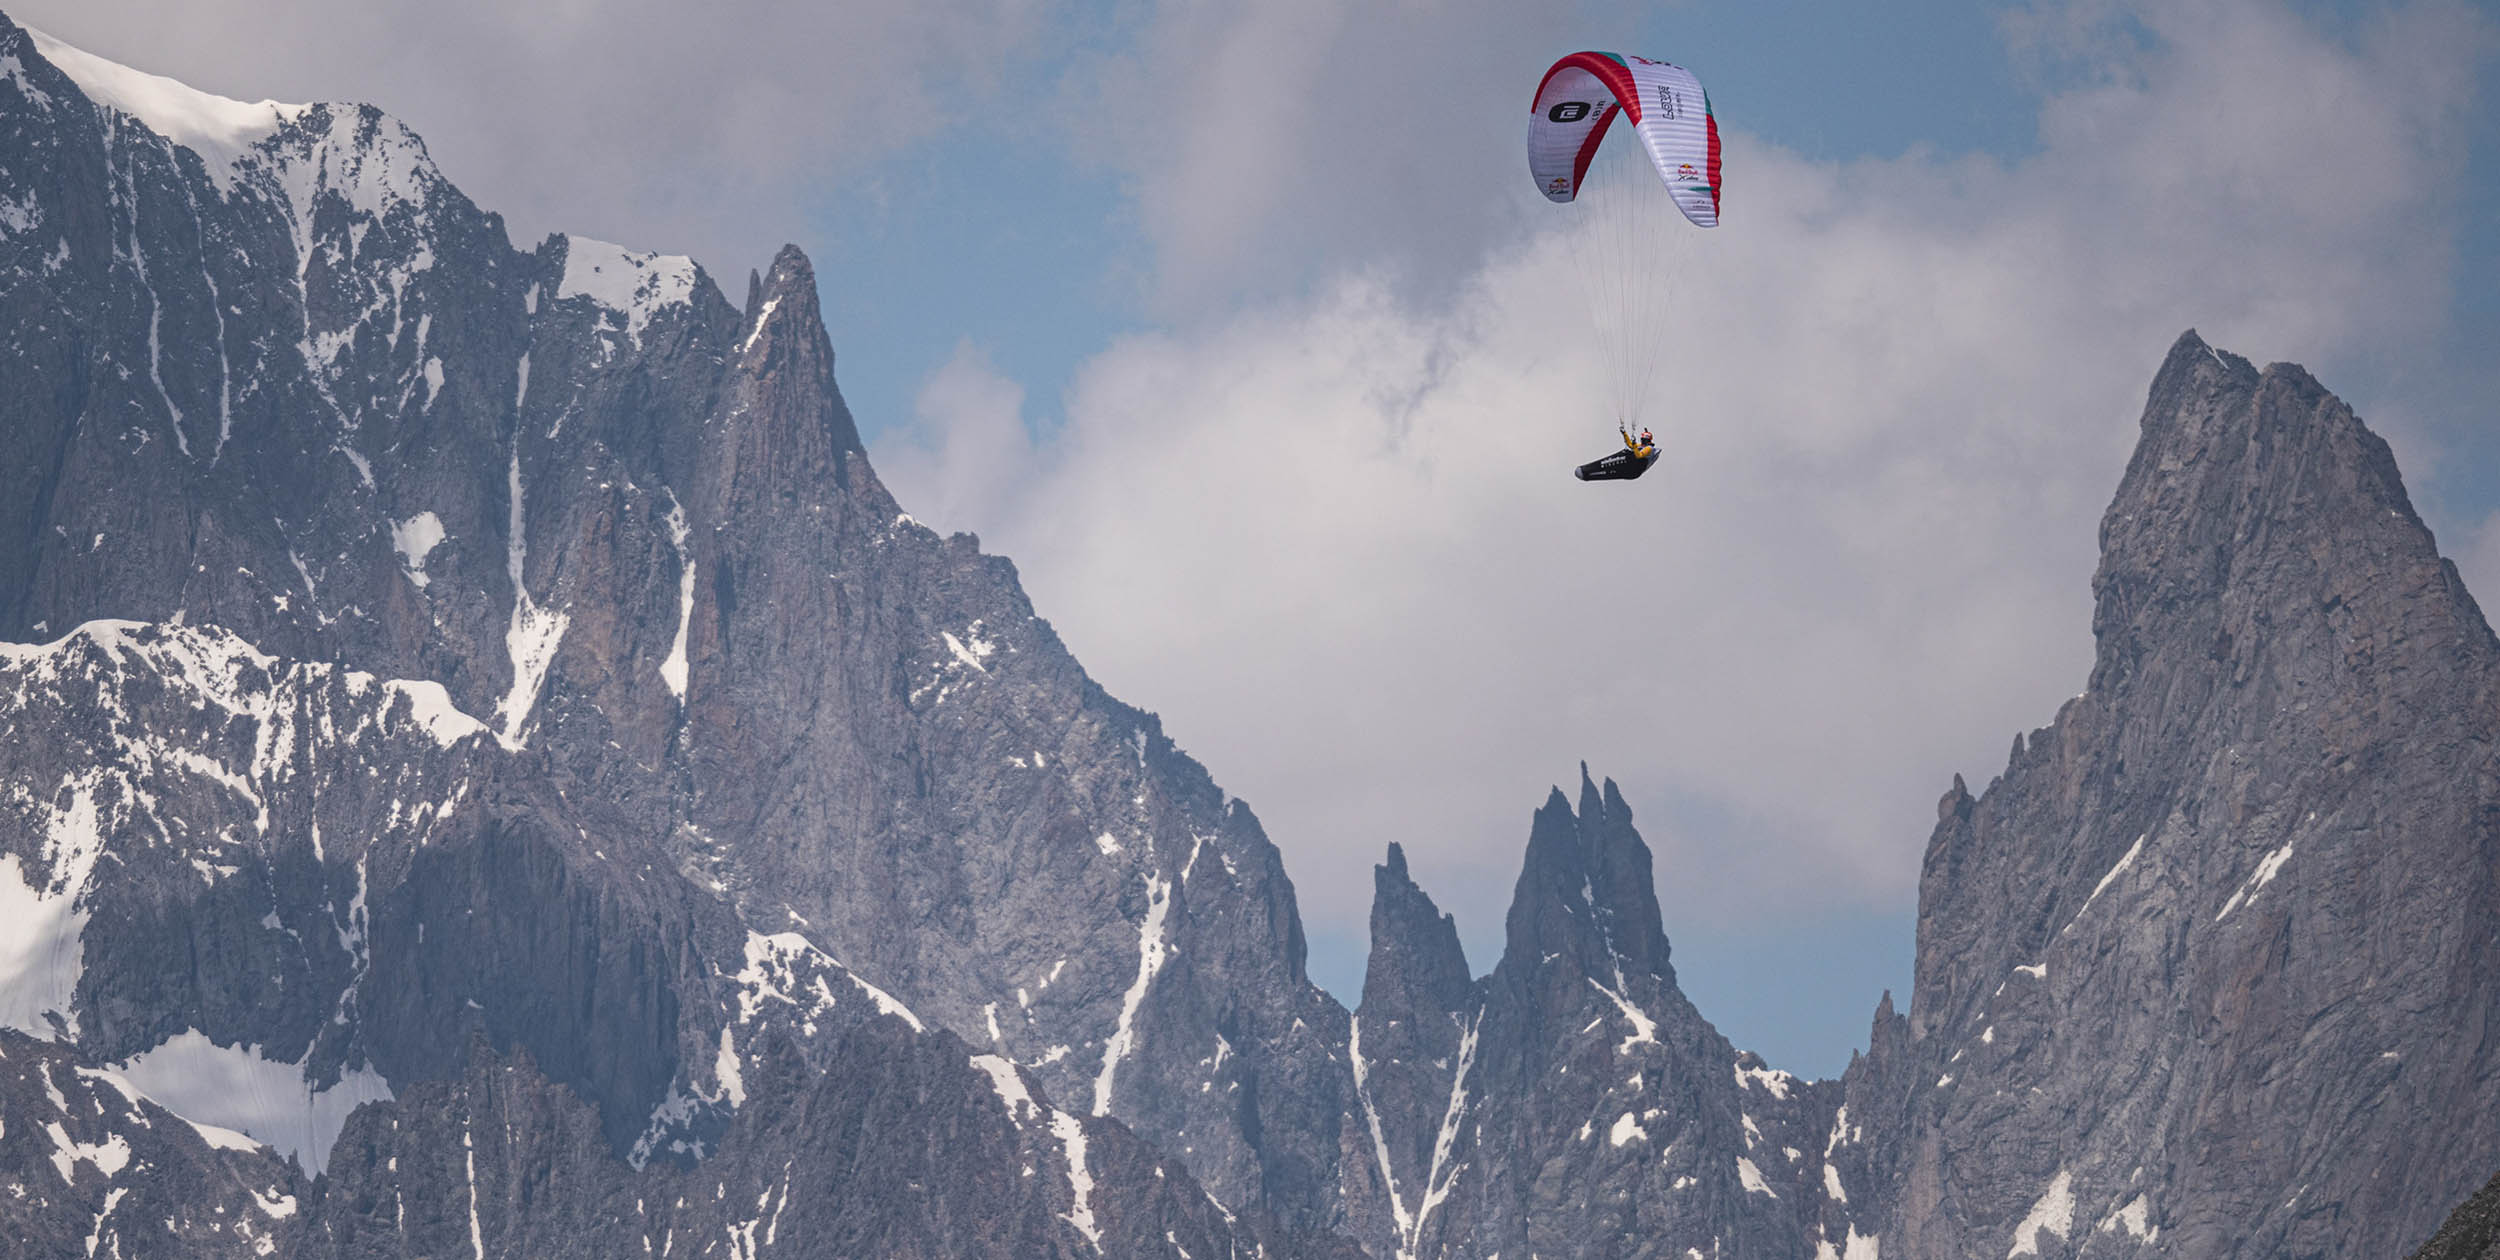 Chrigel Maurer performs during the Red Bull X-Alps 2021 at Mont Blanc, France on June 26, 2021